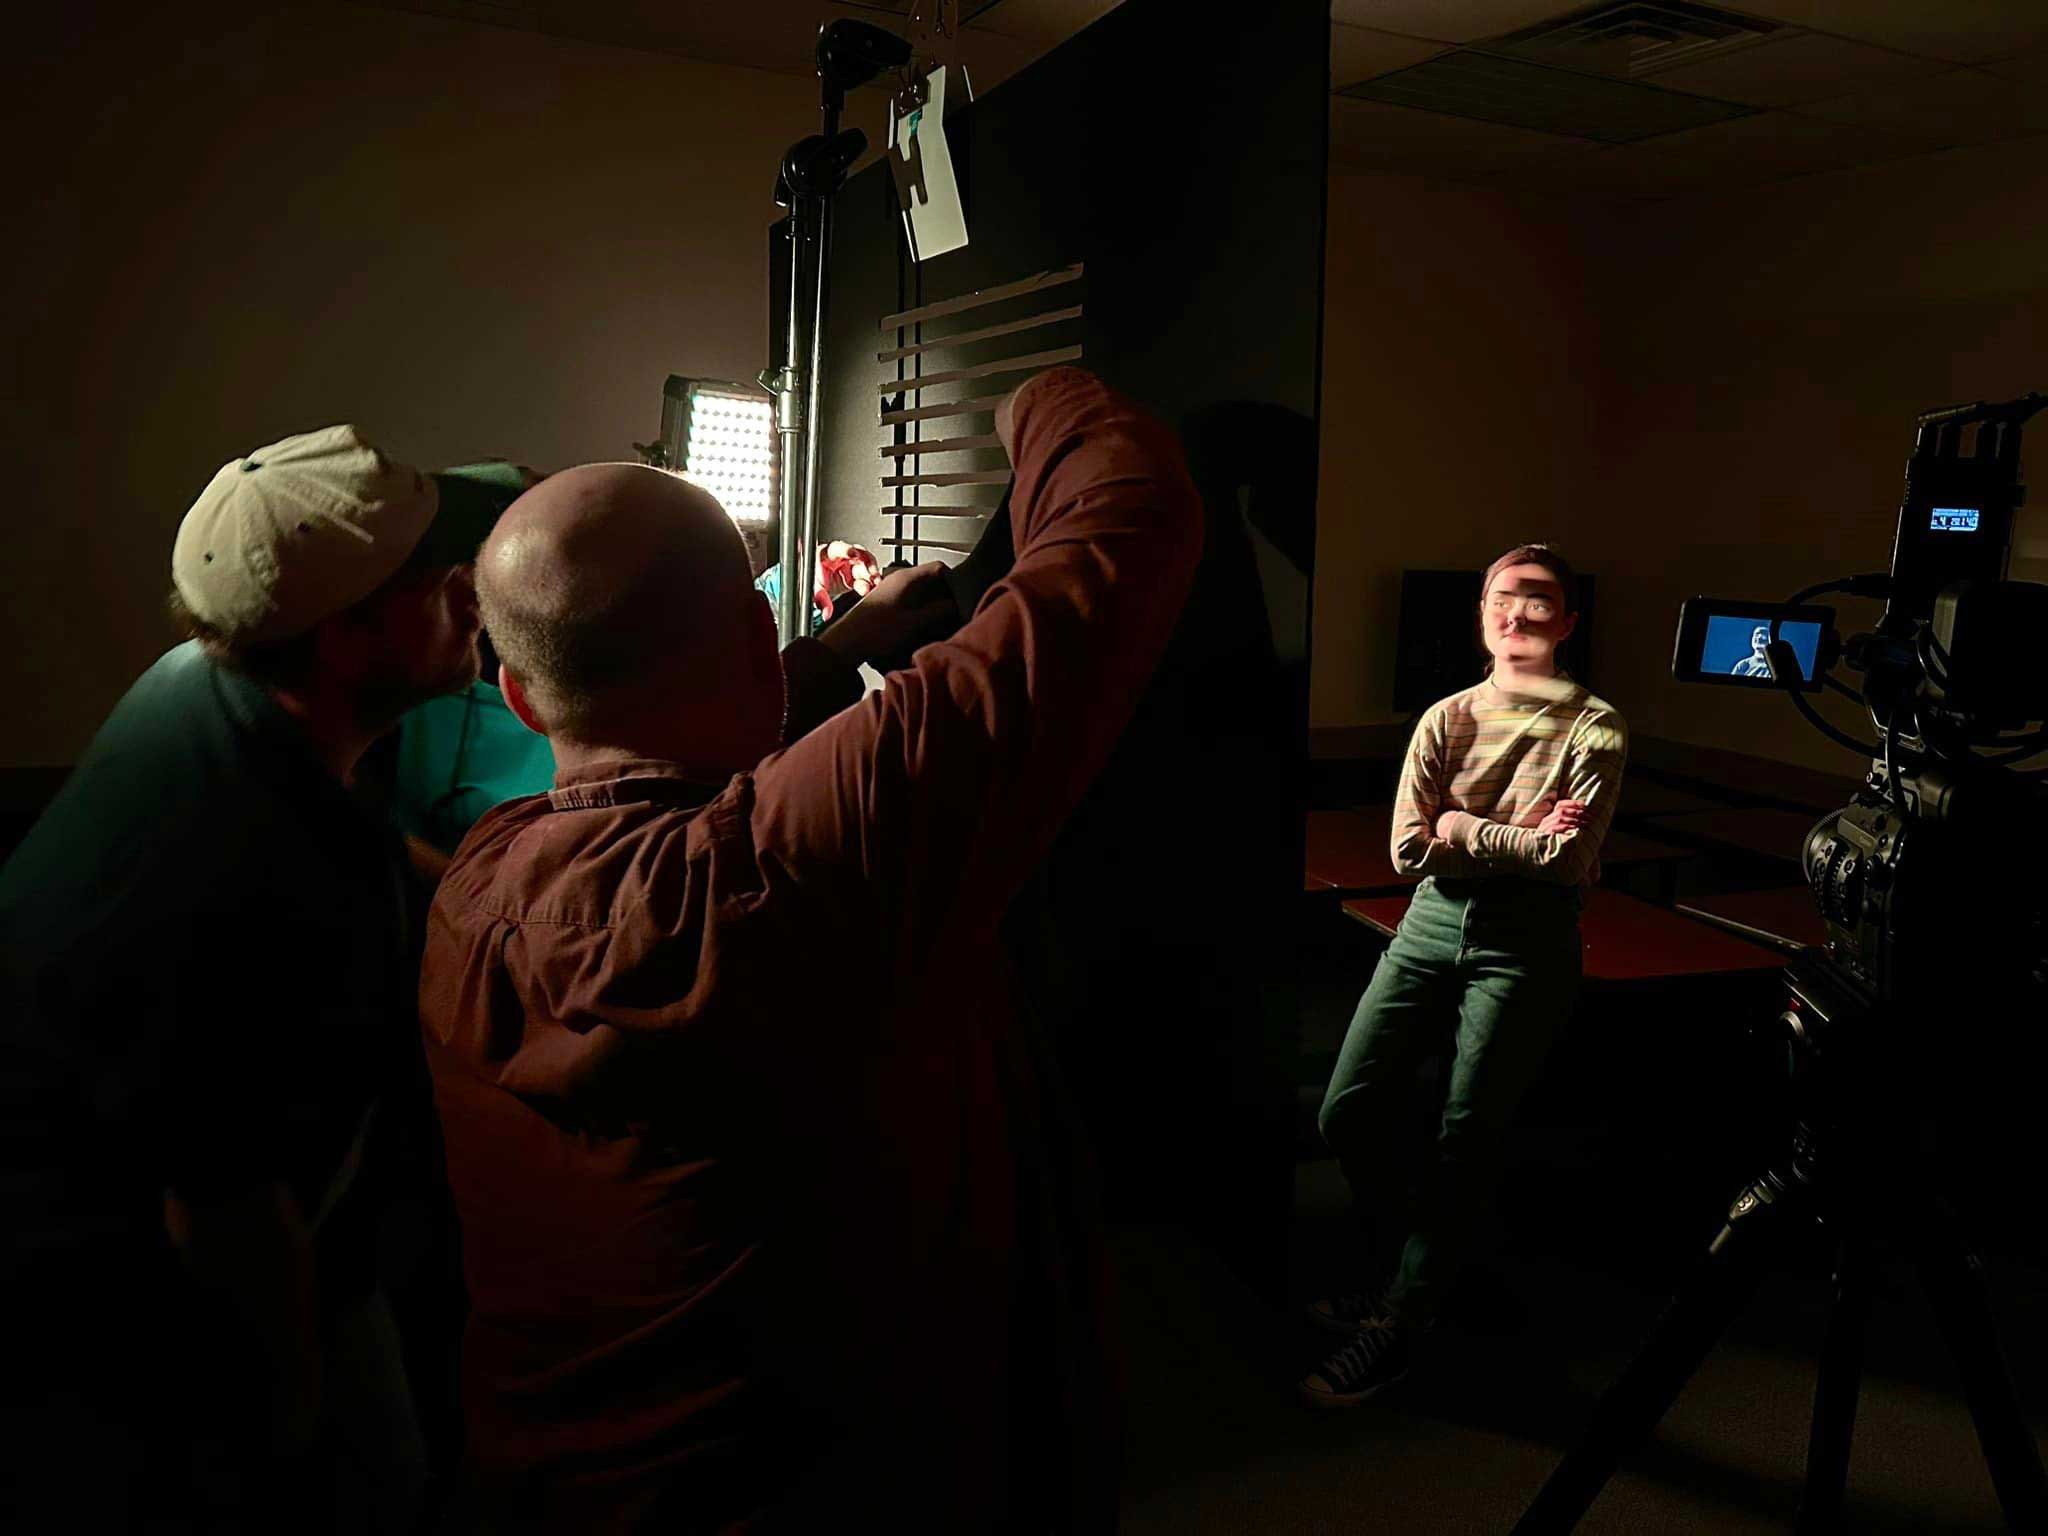 During “The Art of Cinematic Lighting” workshop, students experiment with techniques to create a moody film noir look.